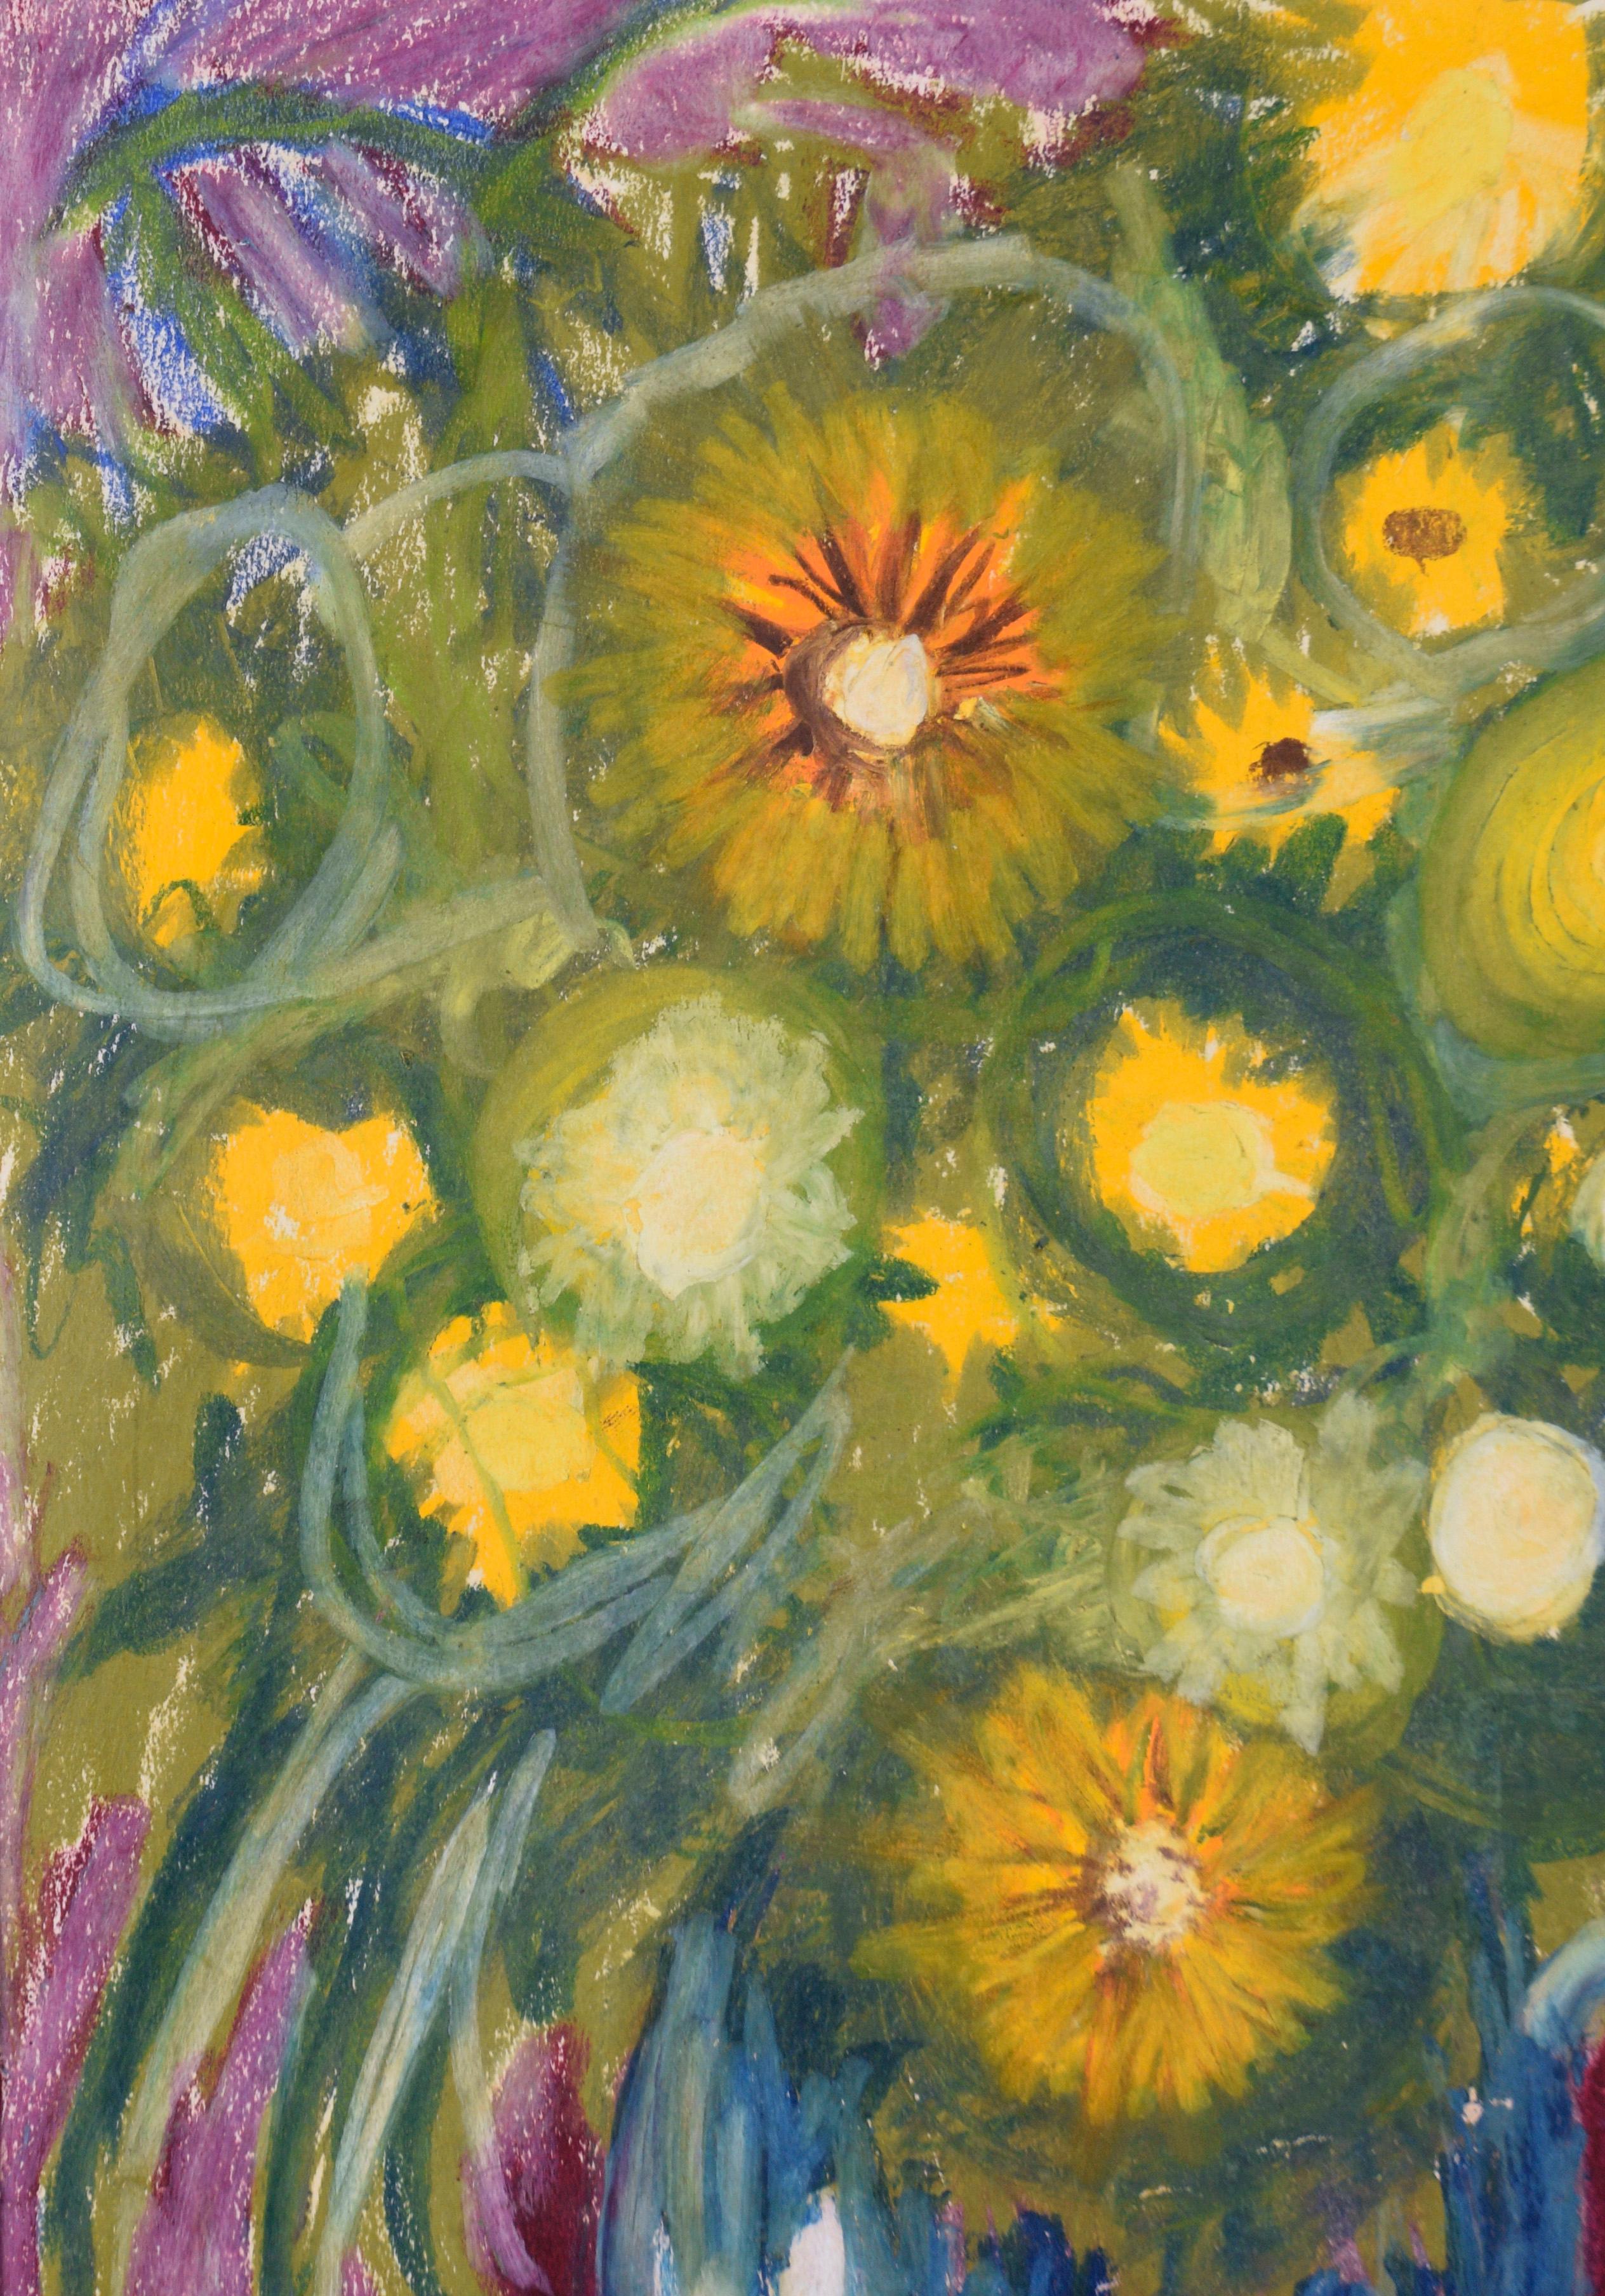 Daisies and Sunflowers - Still Life Oil Pastel on Paper - Abstract Impressionist Art by David Mark